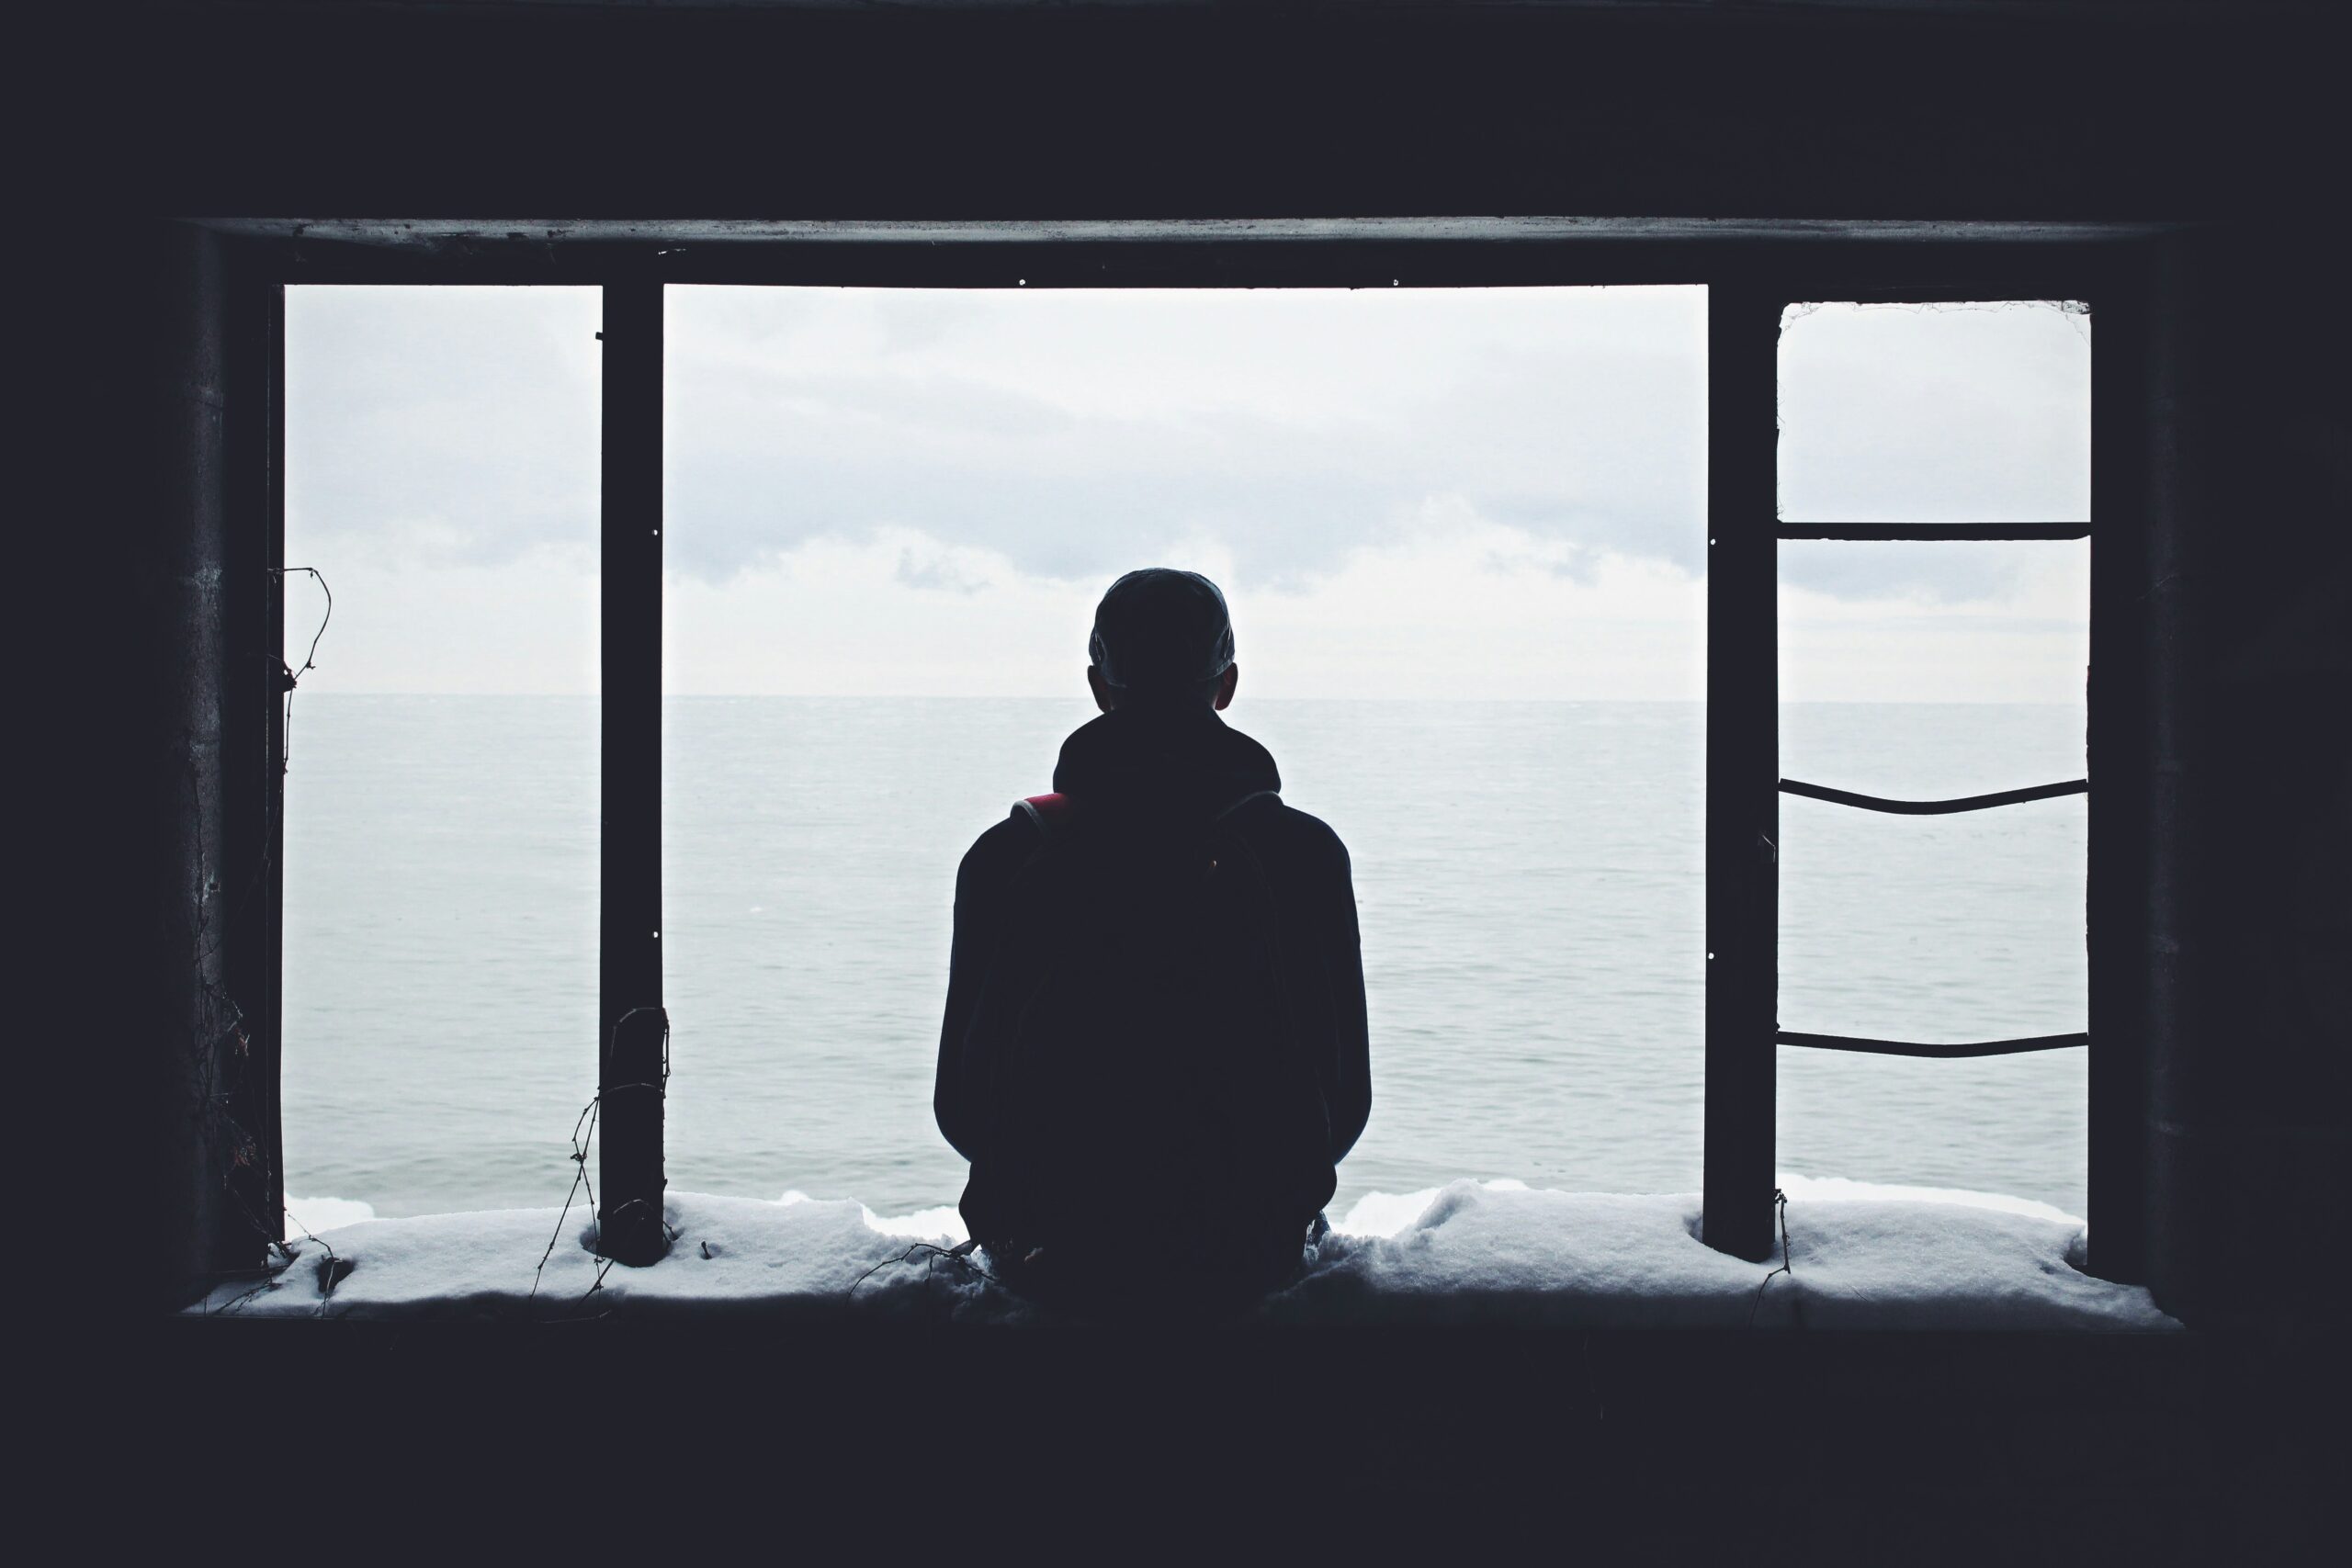 A man sits alone looking out of a window.